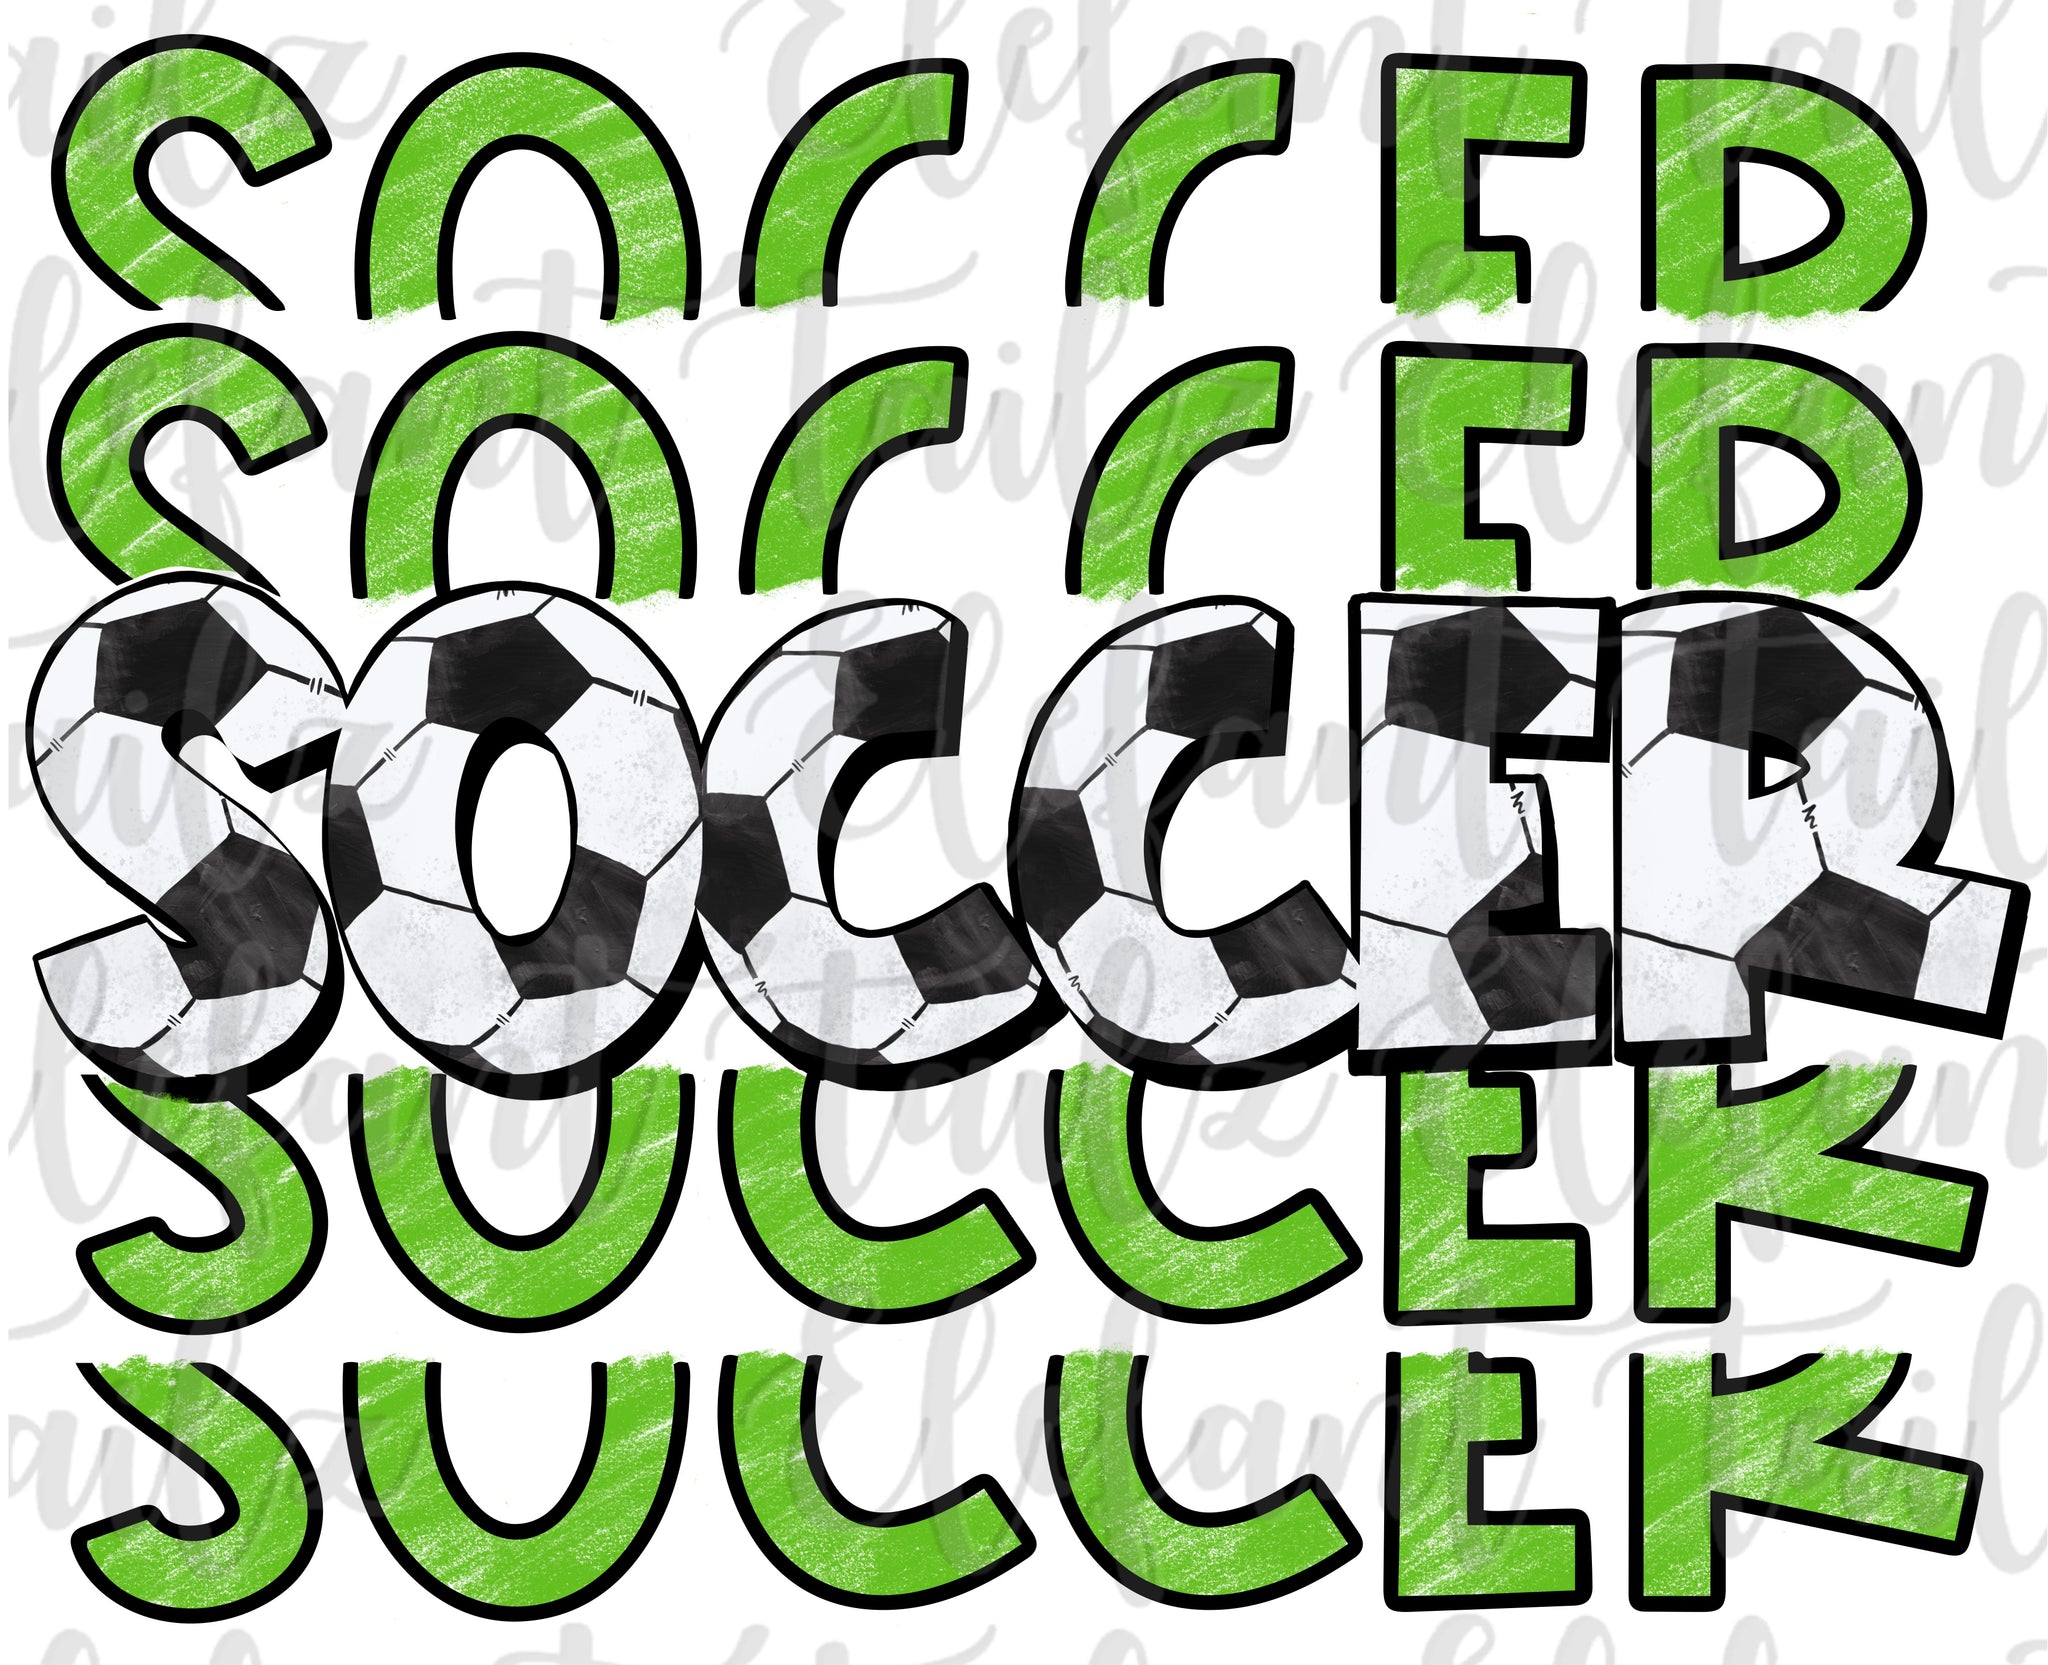 Stacked Soccer